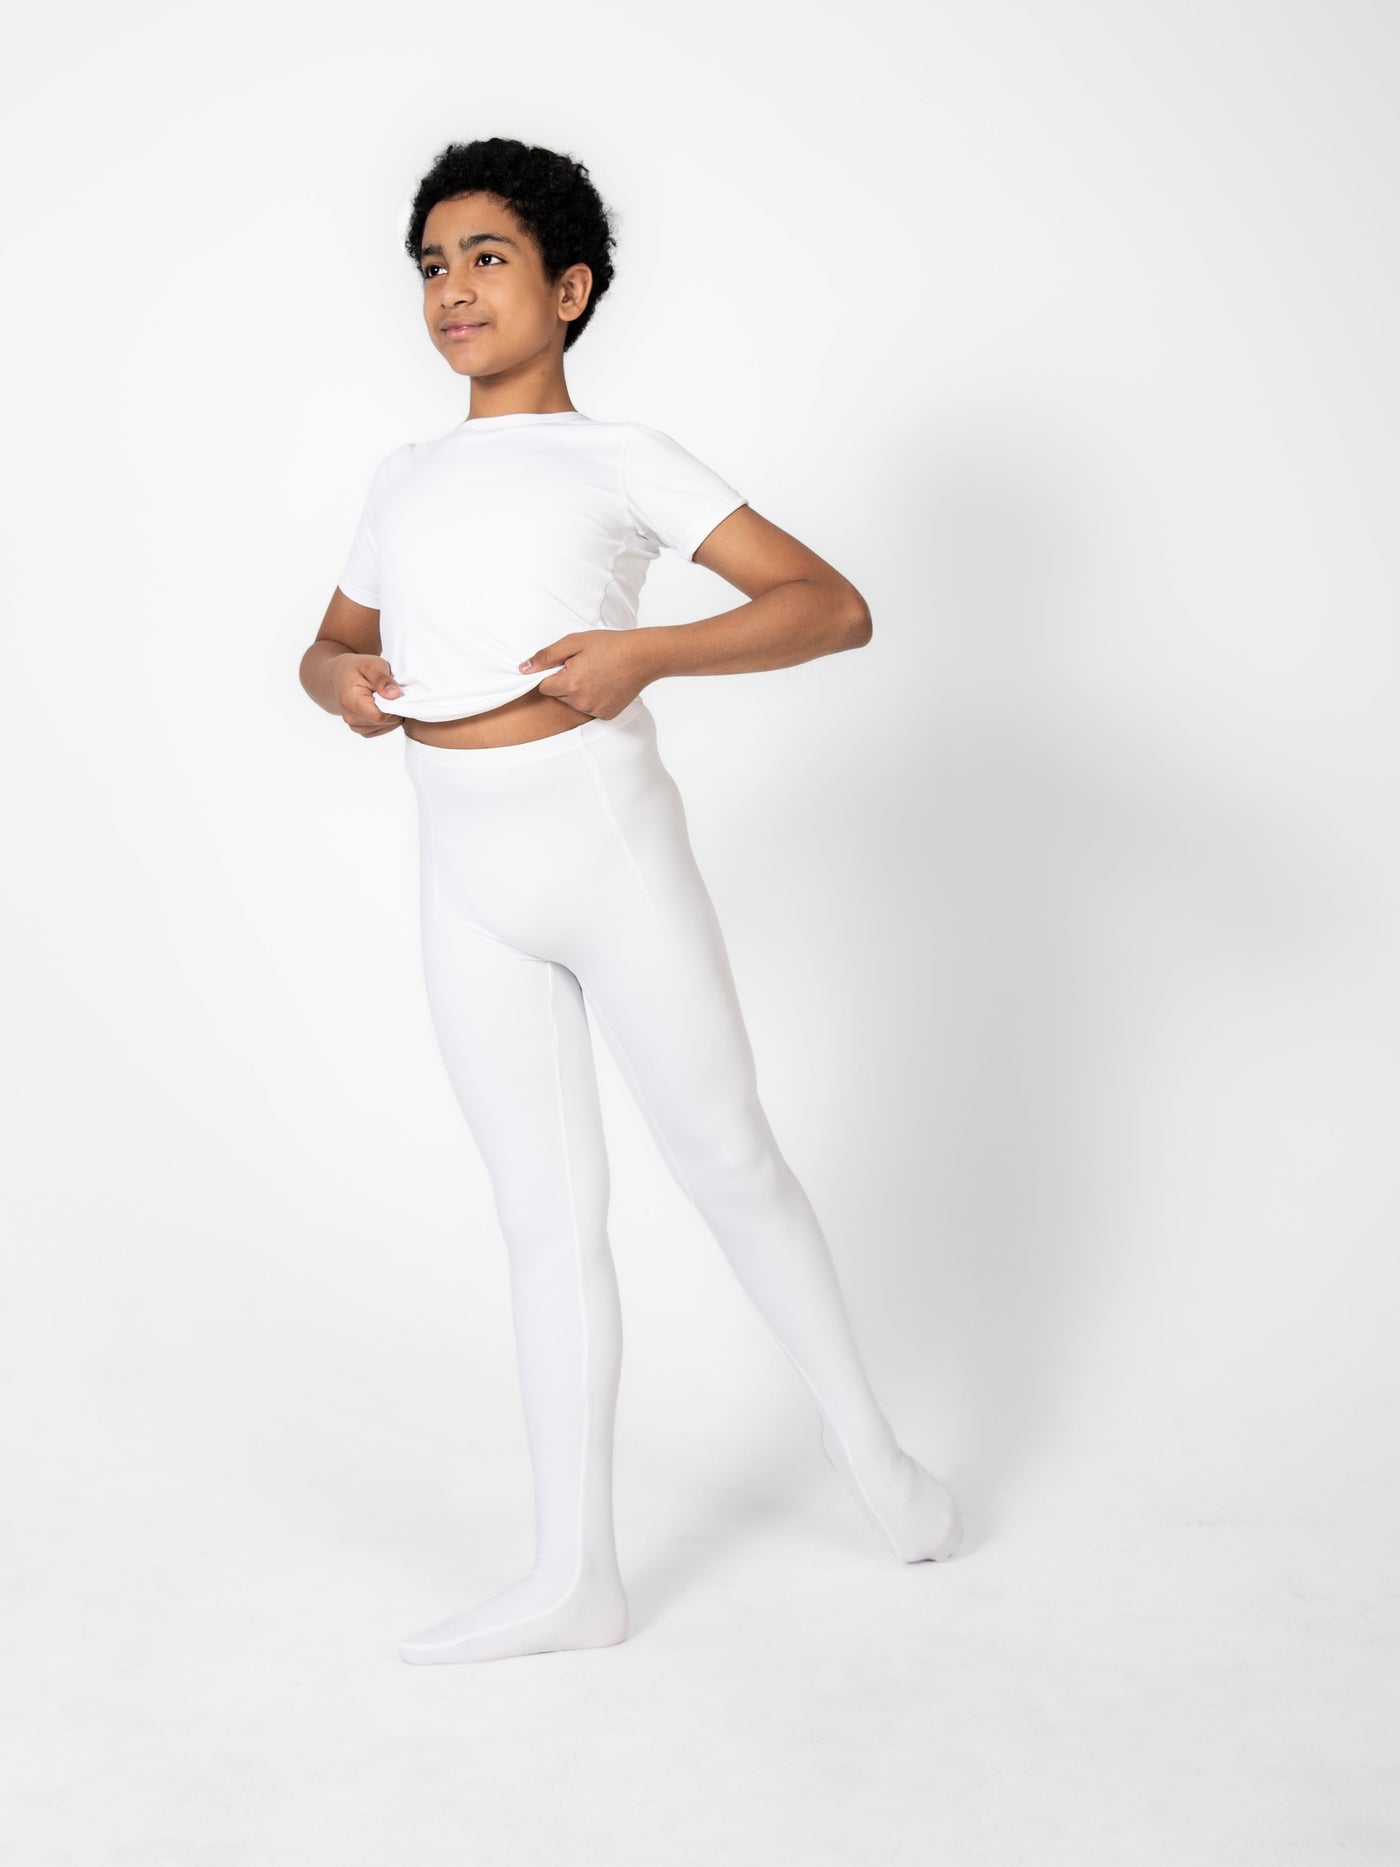 Precision Fit White Convertible Ballet Tights - BOYS